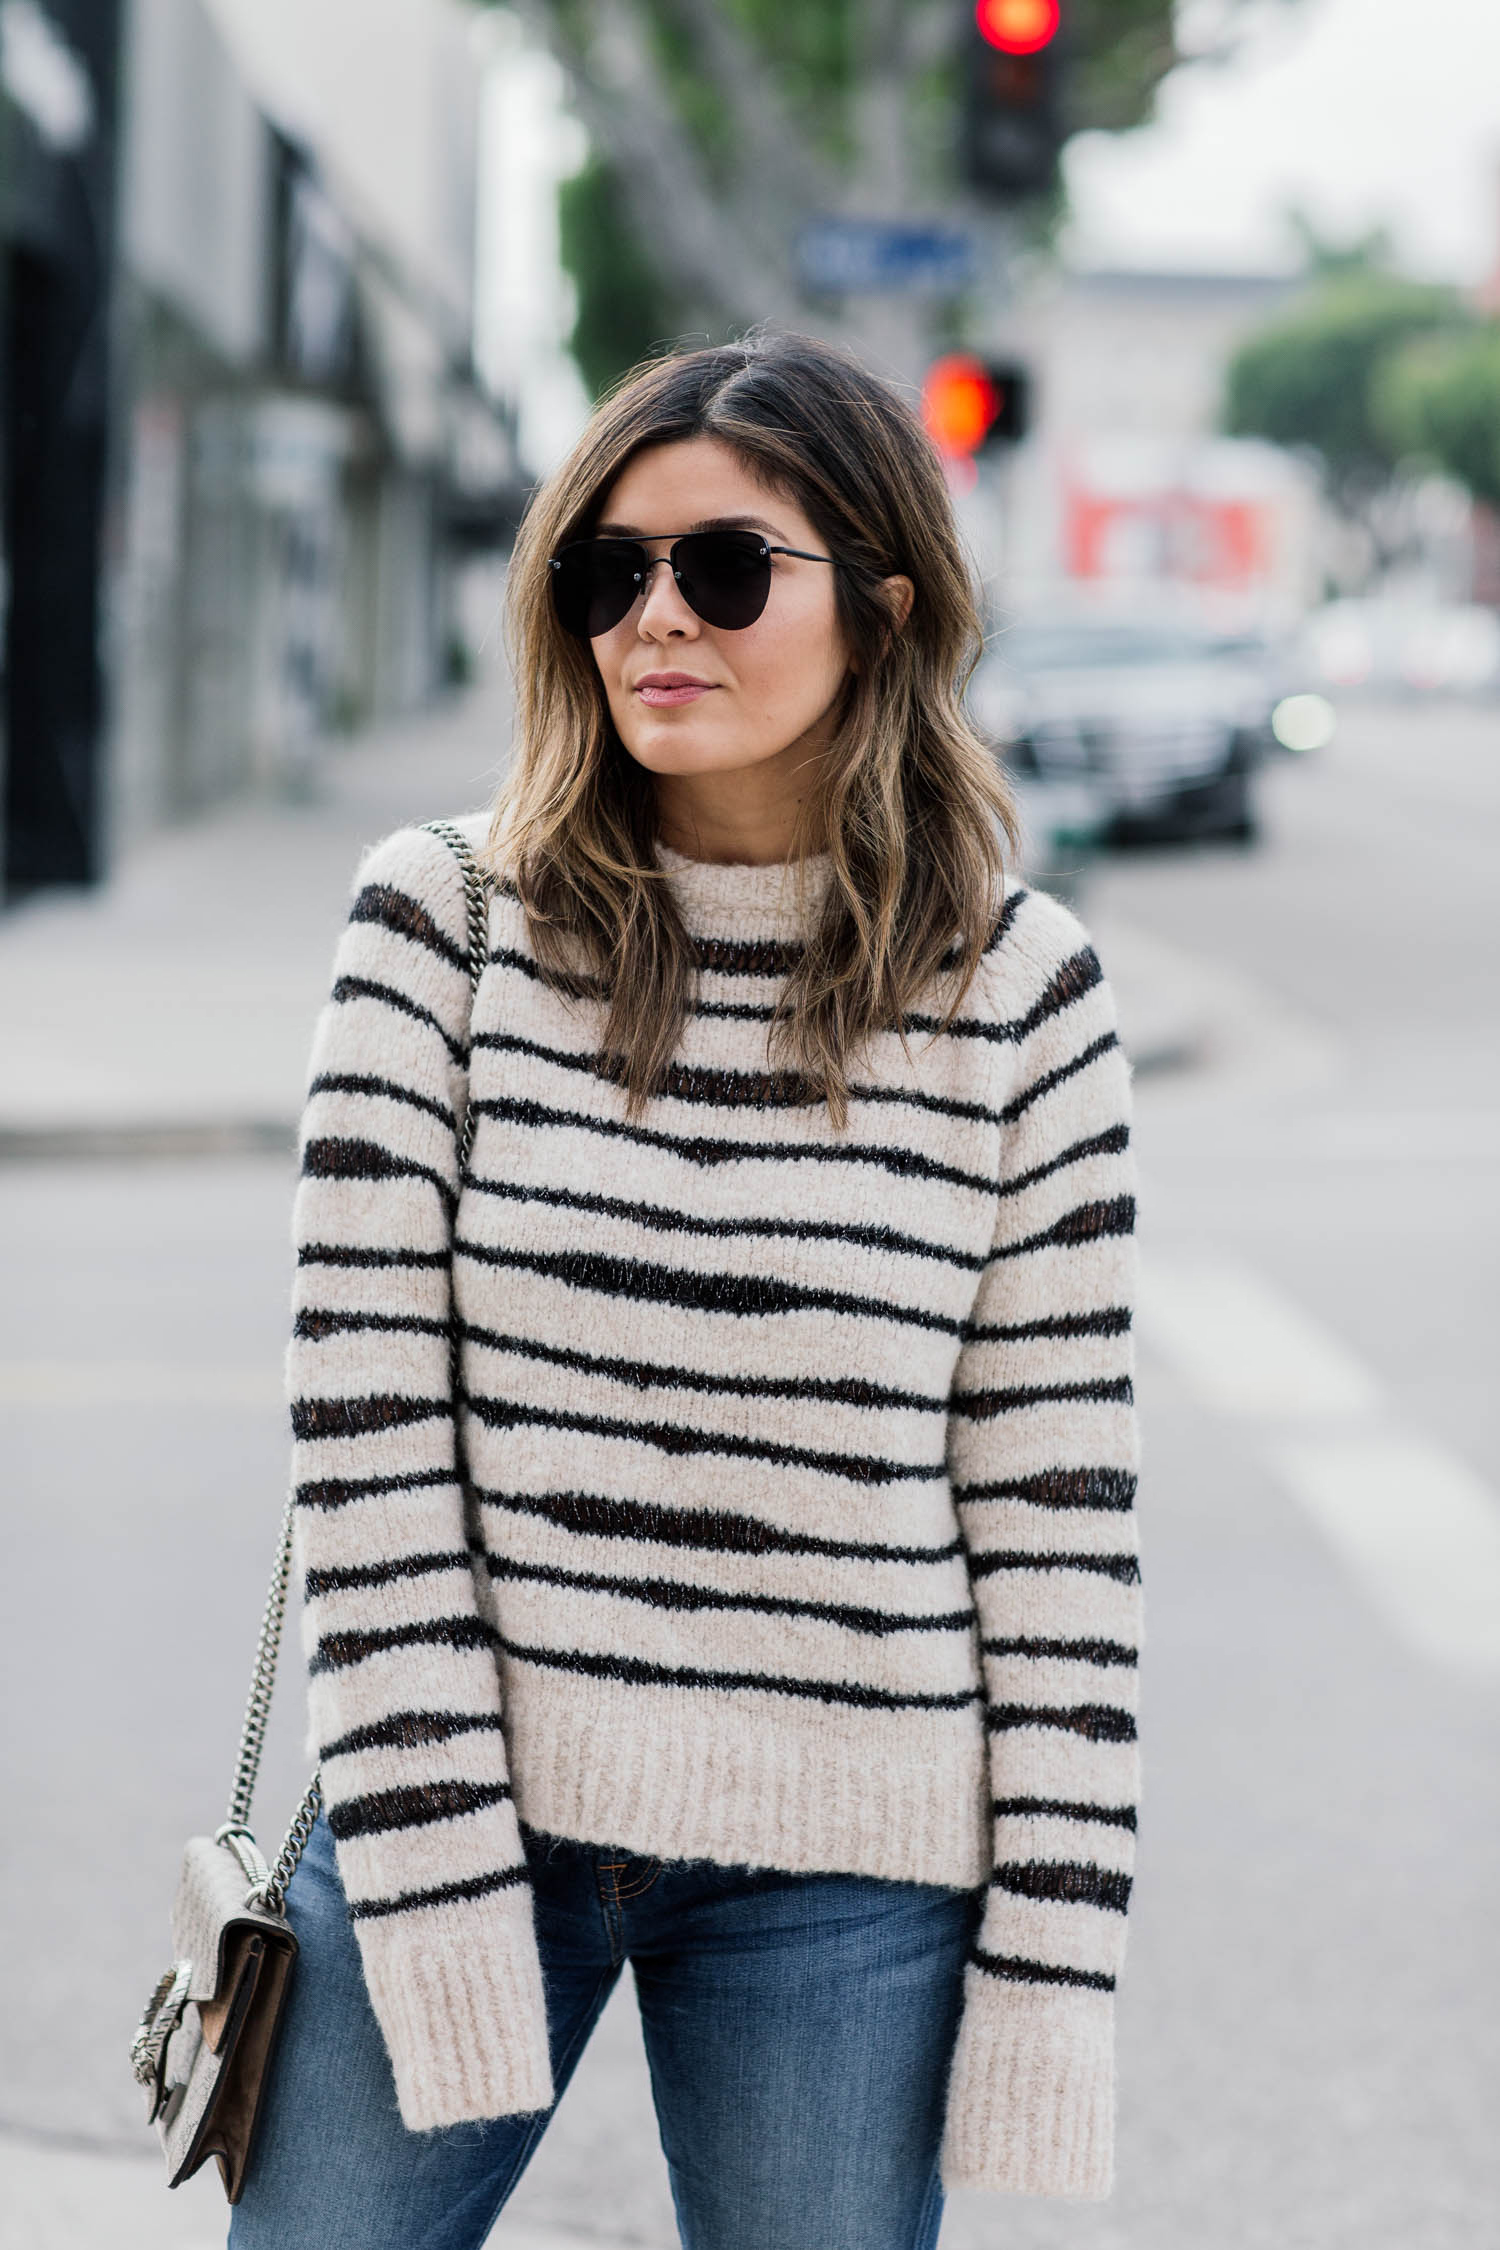 Blogger Sara Azani of Style MBA wearing Zadig and Voltaire white and black knit sweater, 7 For All Mankind crop skinny jeans, Steve Madden Stecy nude high-heeled sandal, Le Specs sunglasses, and a Gucci bag.